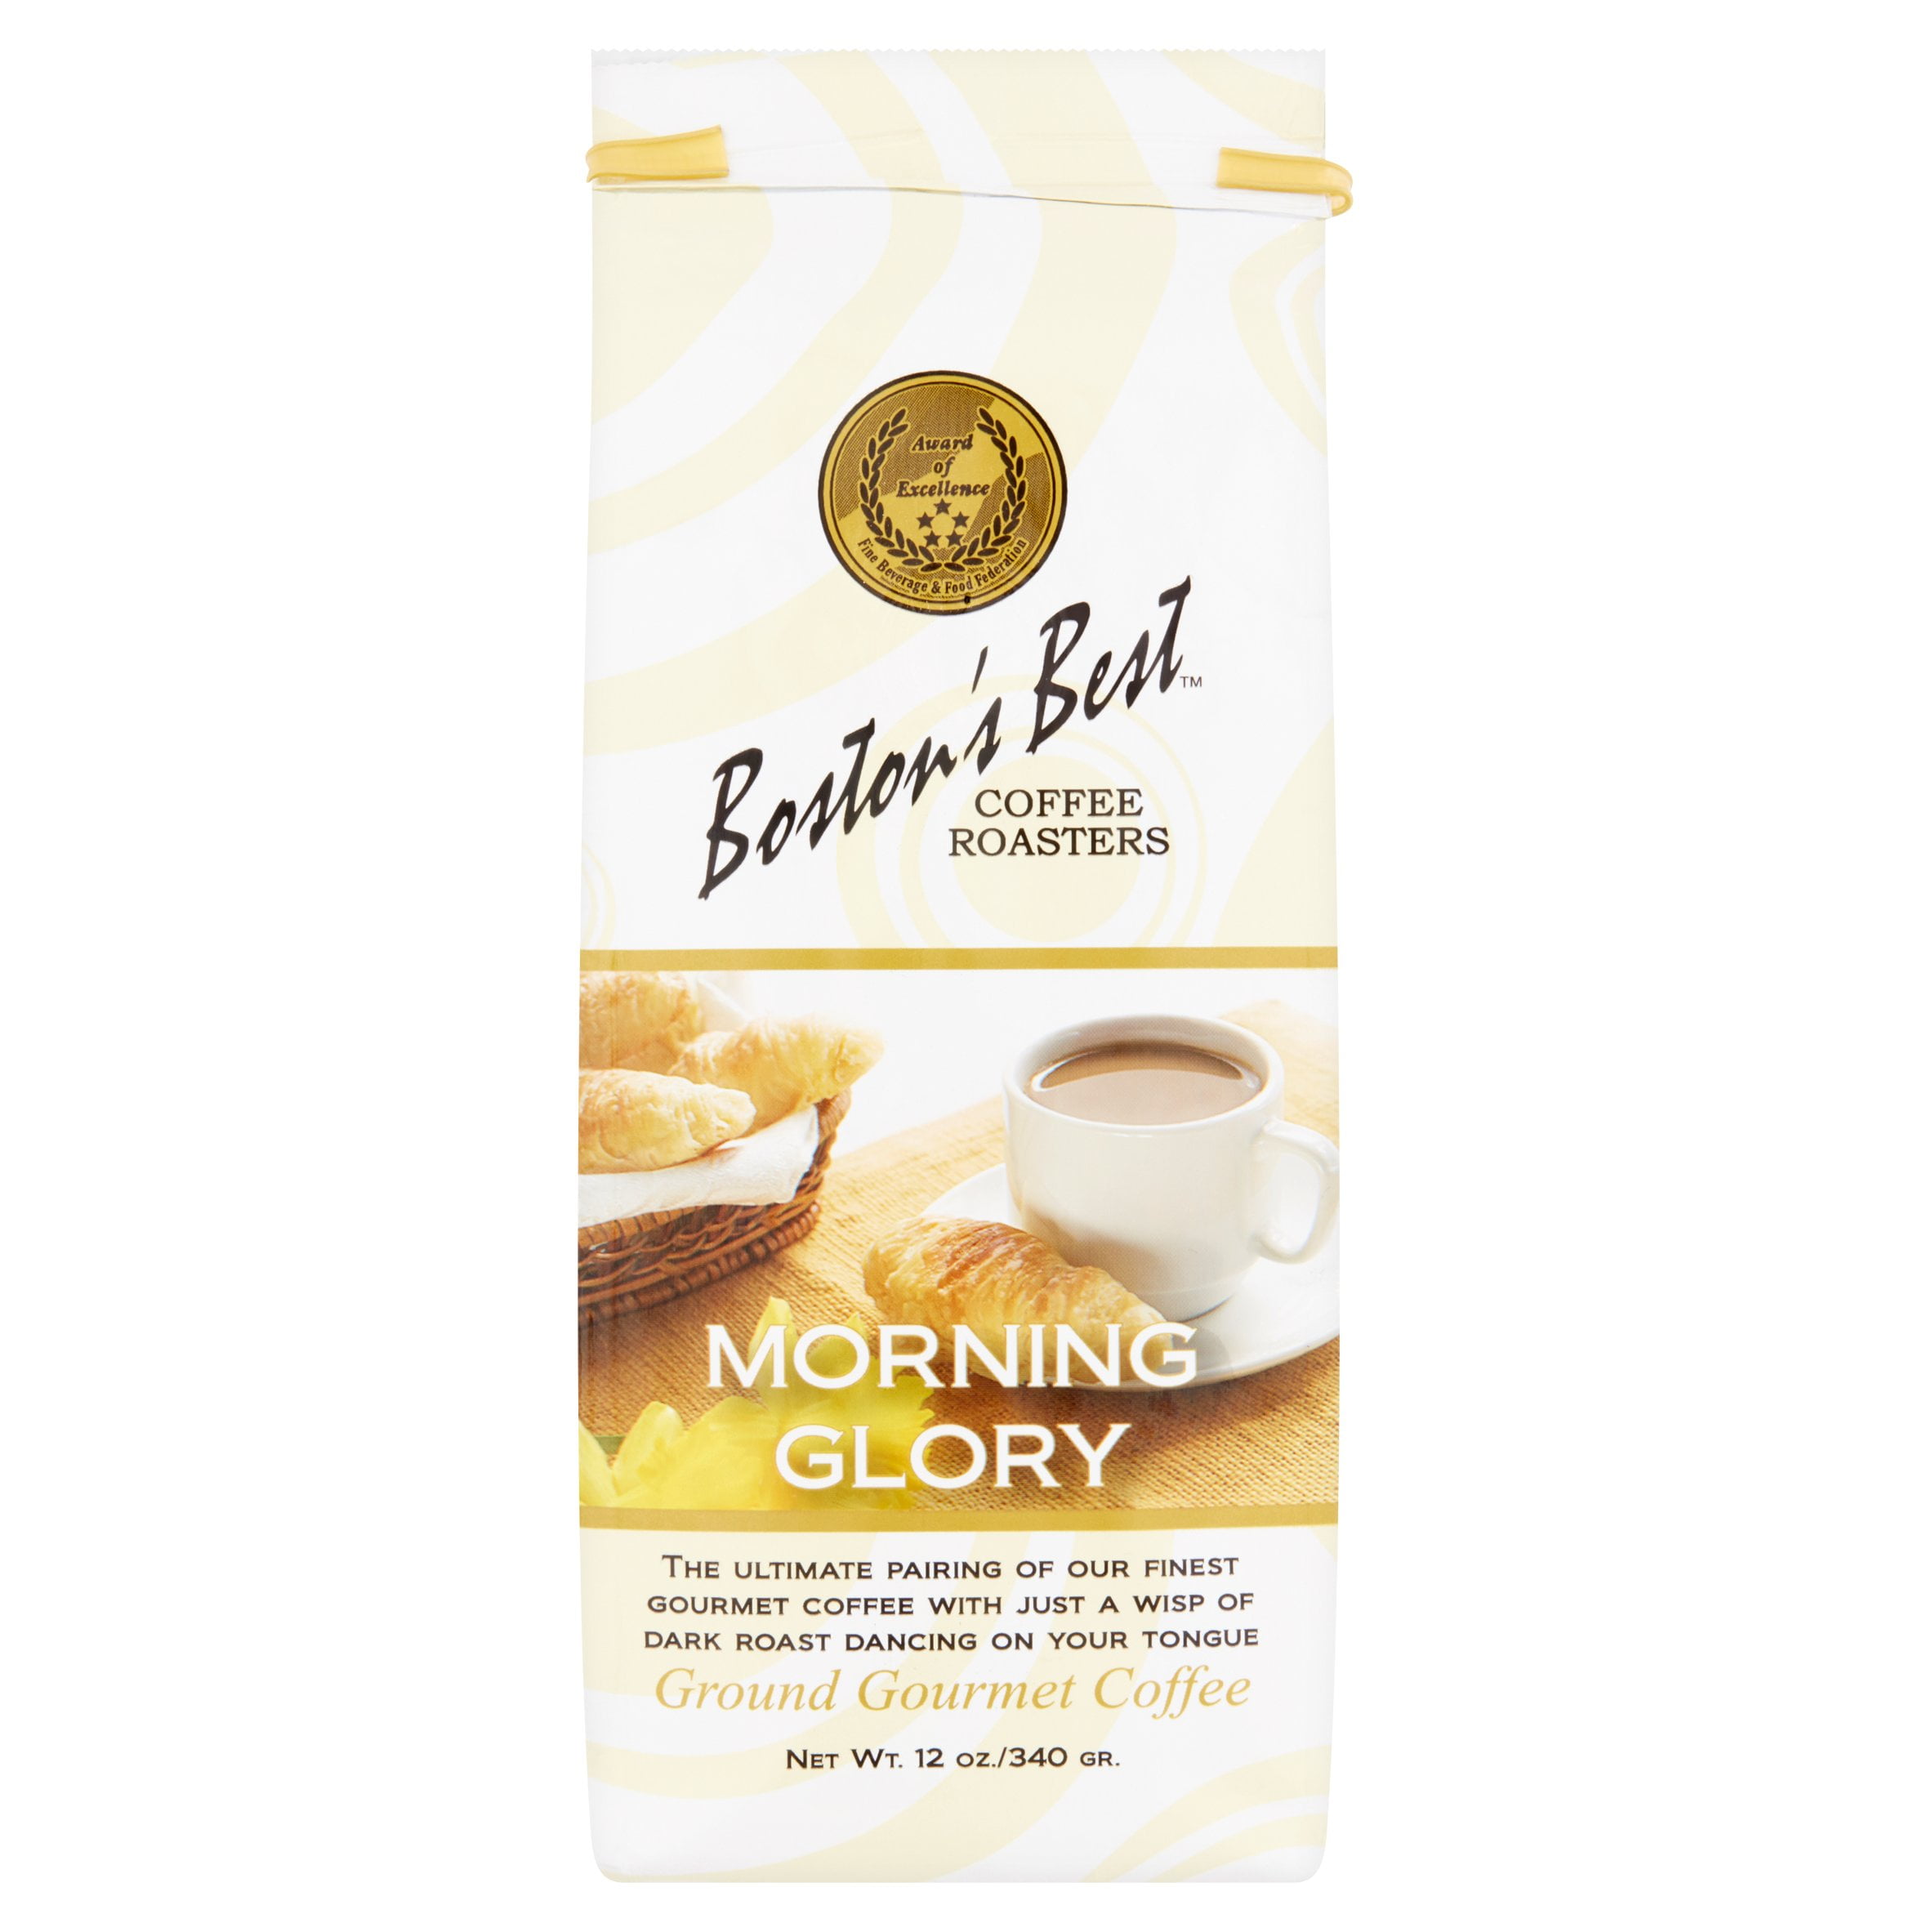 Morning Glory Ground Gourmet Coffee by Bostons Best for